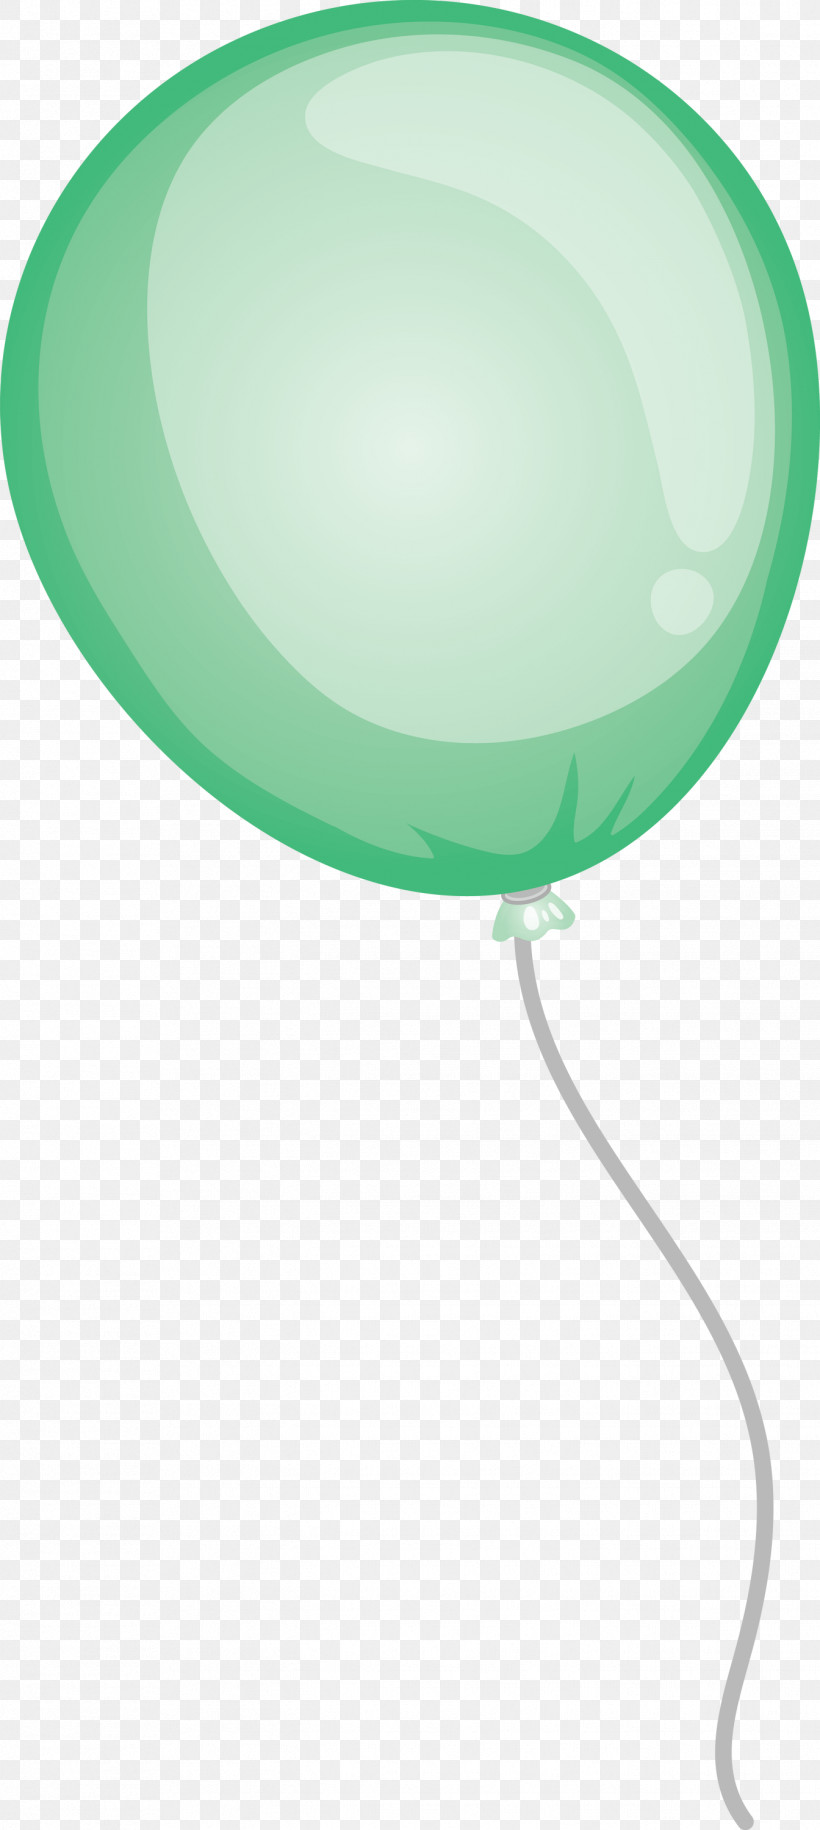 Balloon, PNG, 1344x3000px, Balloon, Green Download Free